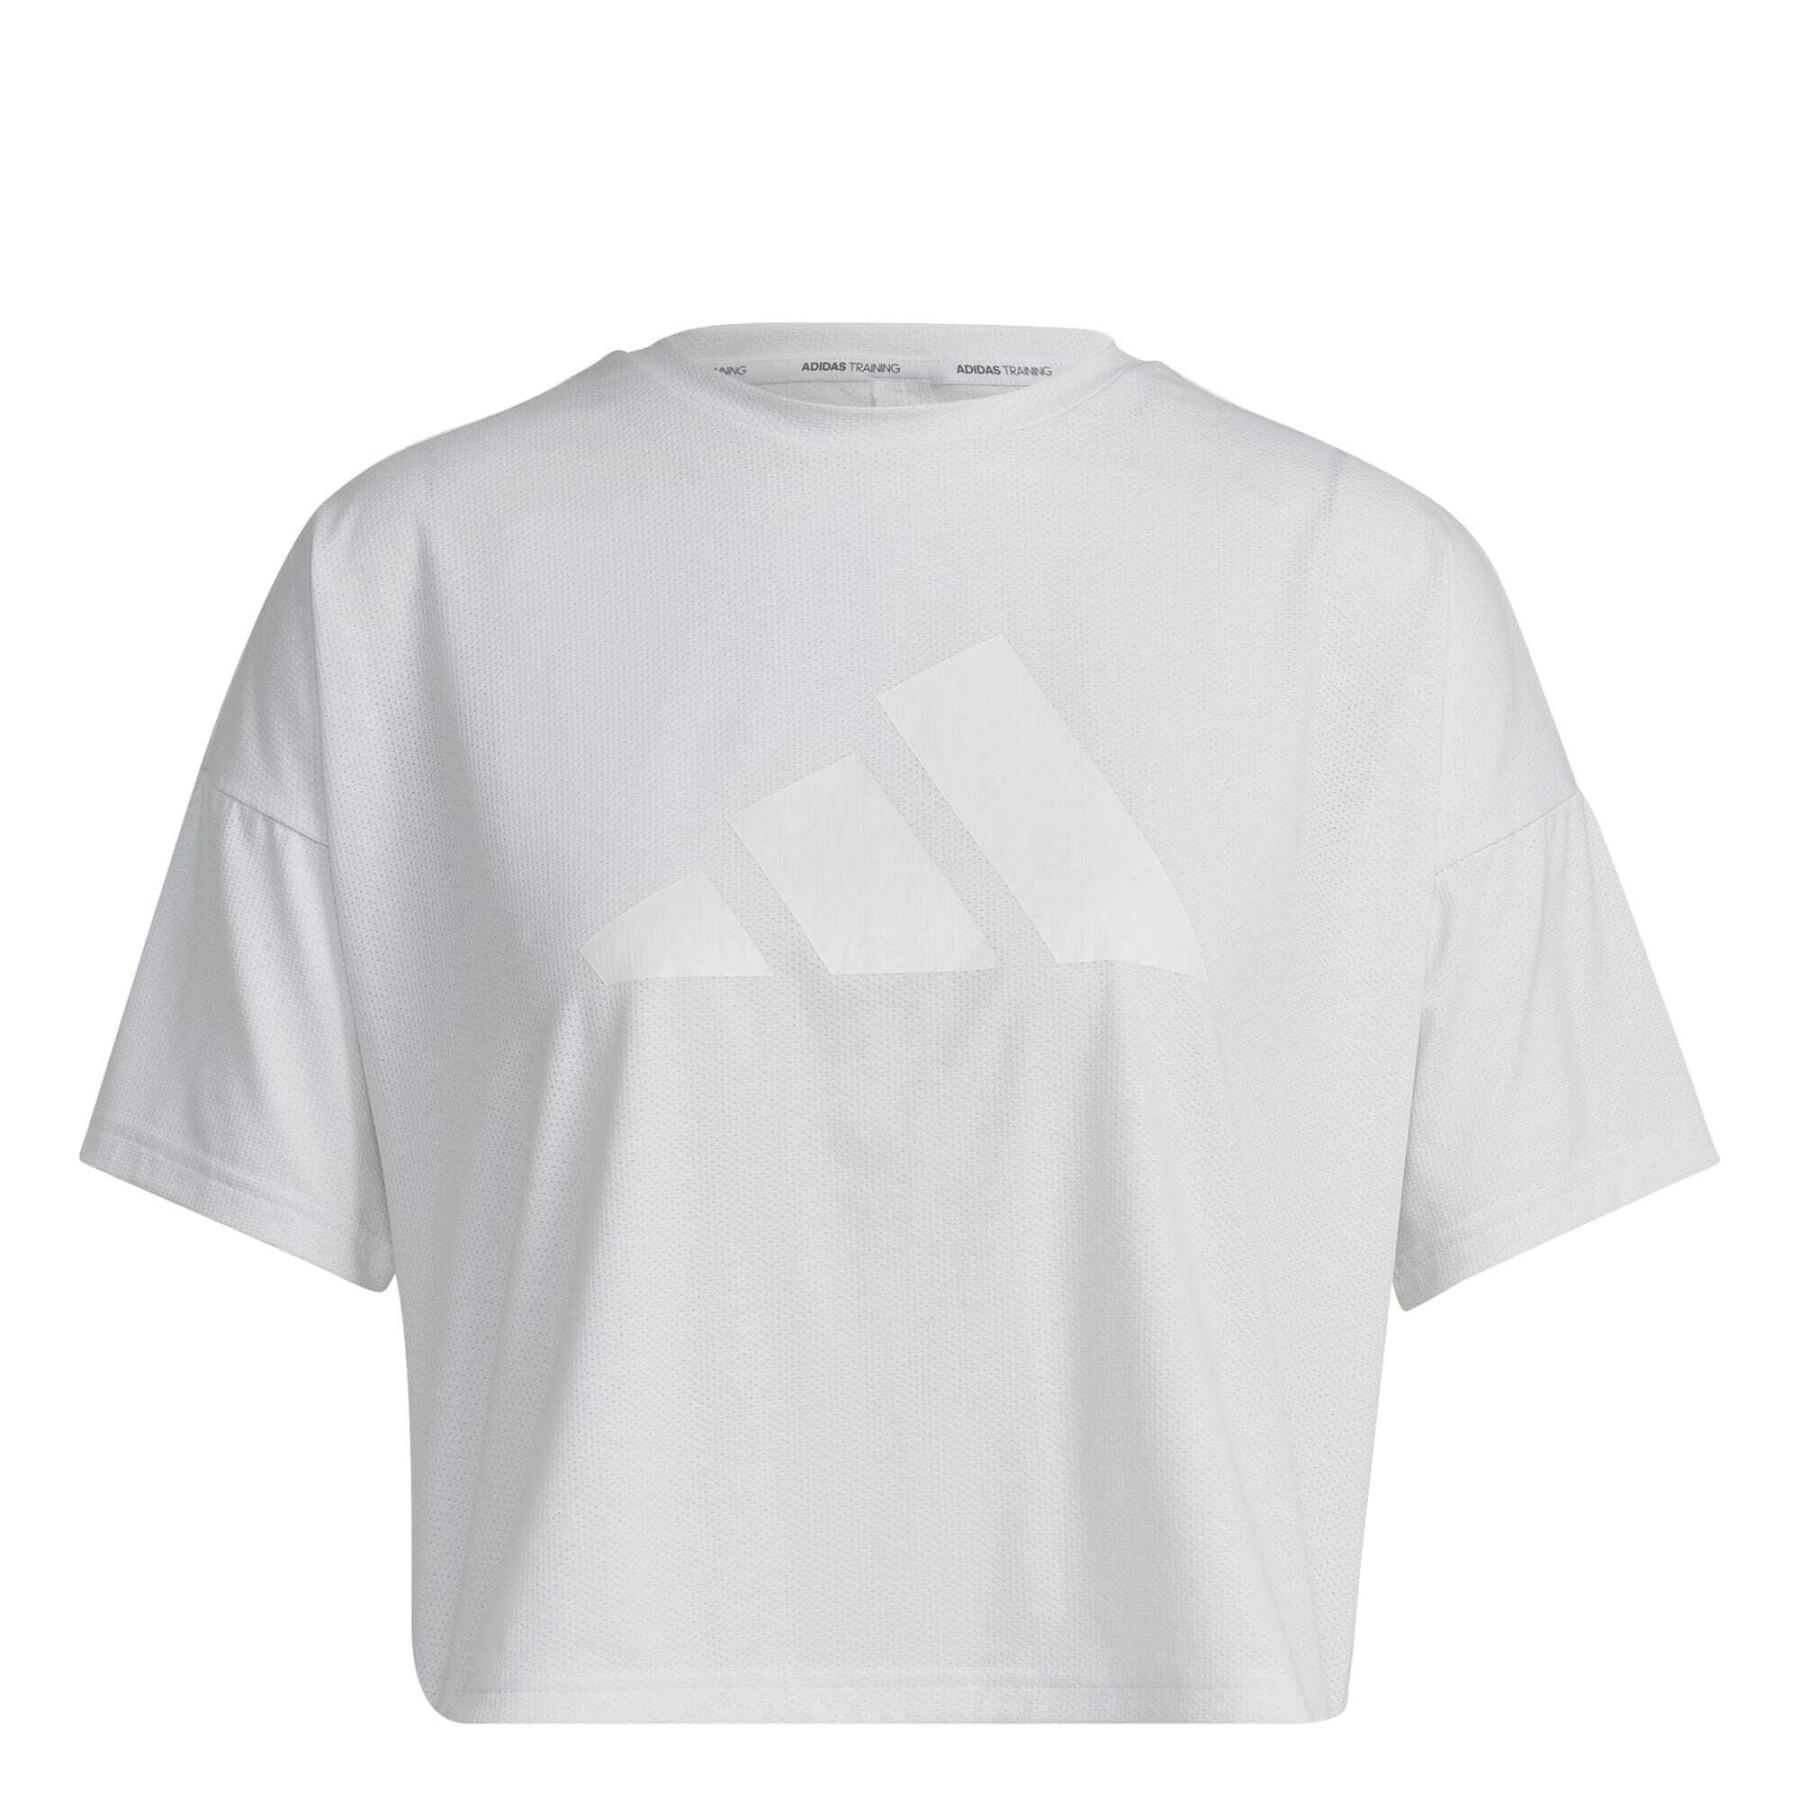 T-shirt with 3-bar logo for women adidas Train icons